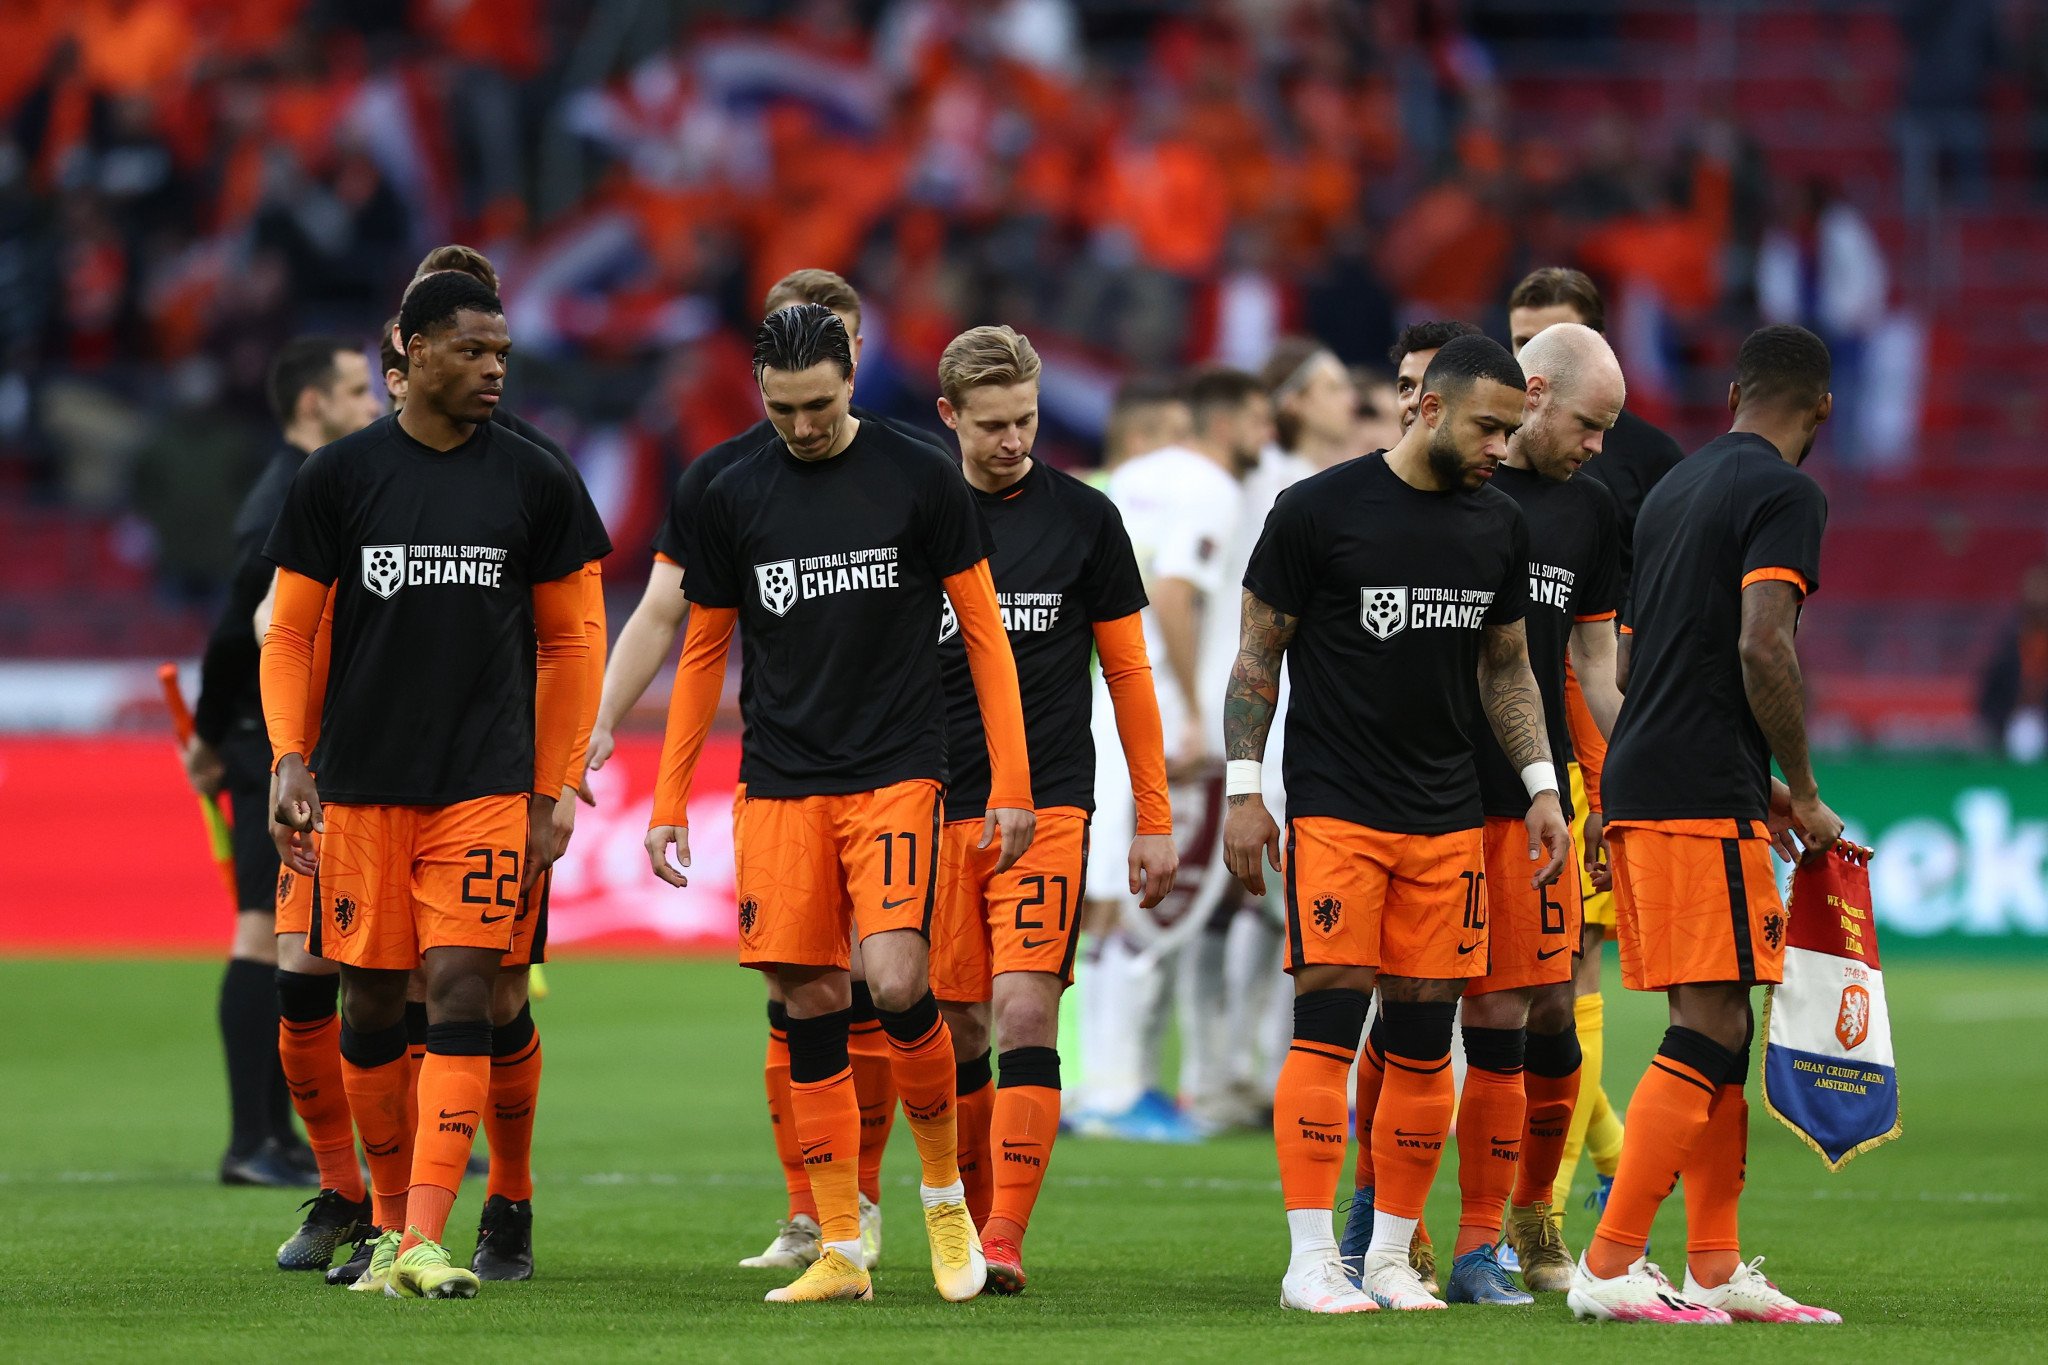 Dutch players wore shirts with the message "Football Supports Change" in a World Cup qualifier last year ©Getty Images